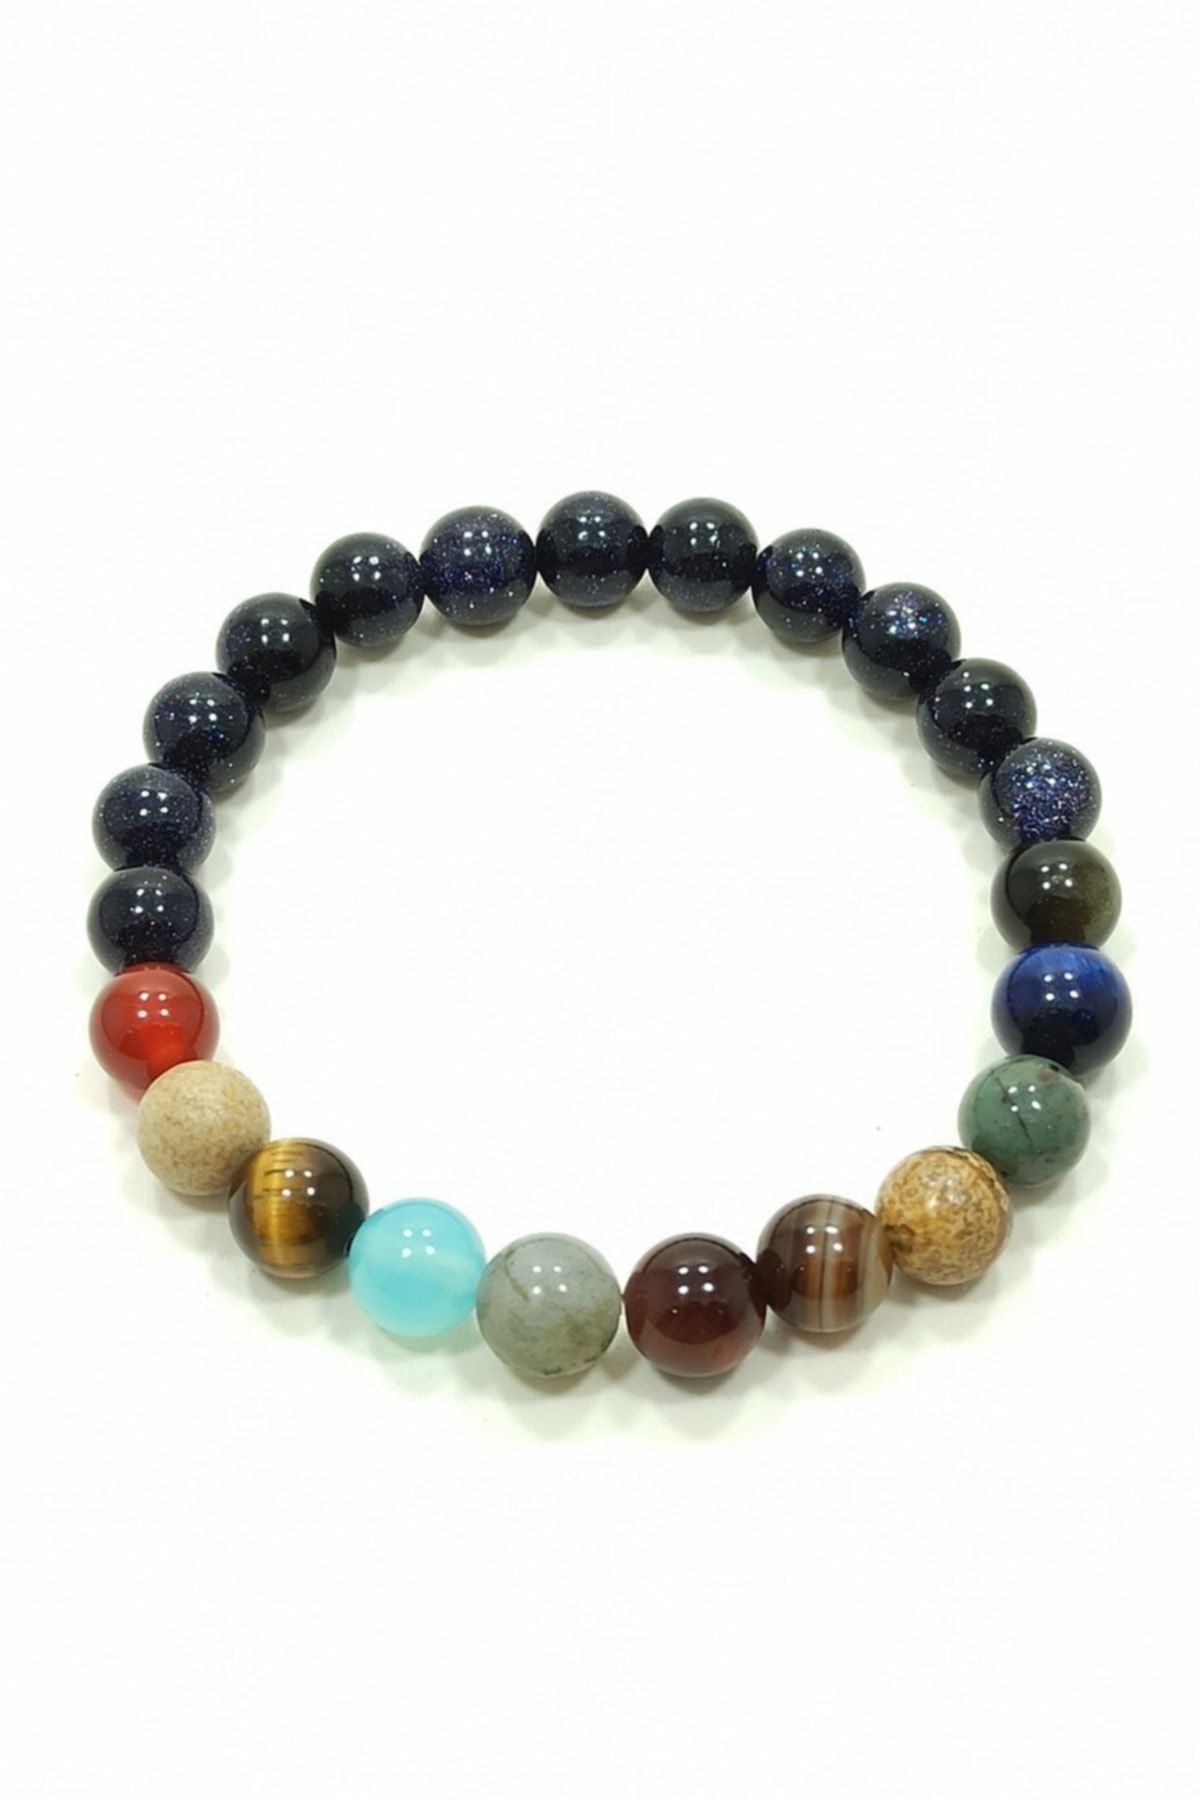 Buy Solar System Bracelet Galaxy for Women and Man. All 8 Planets Beads.  Natural Stone Jewelry. Beaded Bracelet. Fashion and Looks Great. Online in  India - Etsy